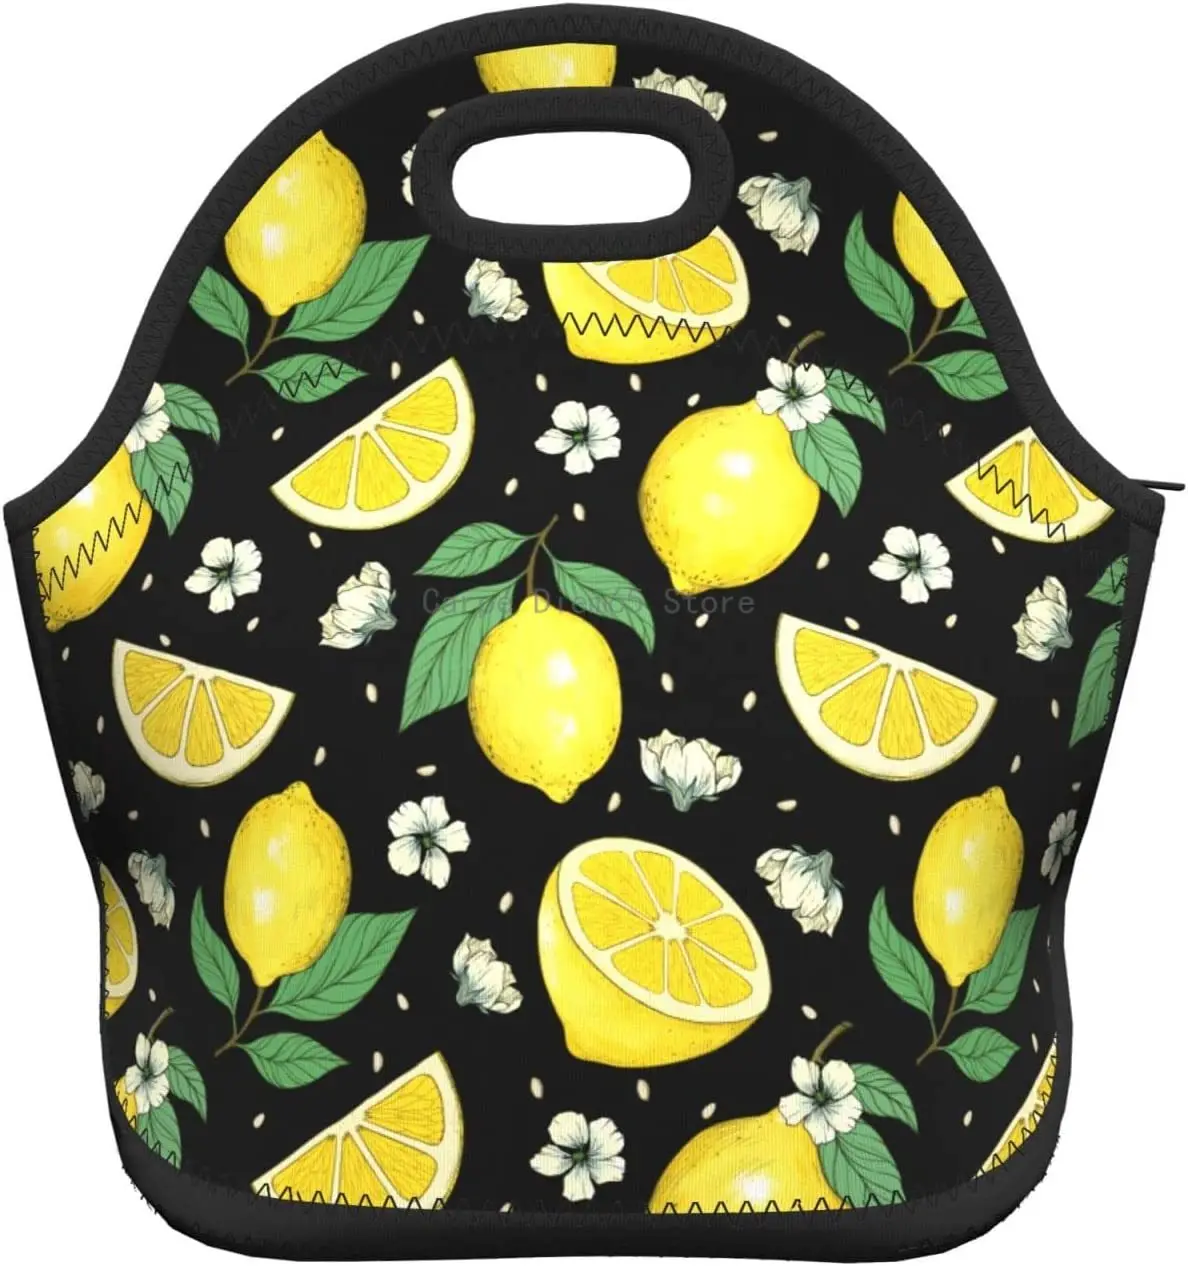 

Lemons Insulated Neoprene Lunch Bag Tote Lunch Bags Portable Lunch Box Cooler Lunch Bag for Picnic/Boating/Fishing/Work